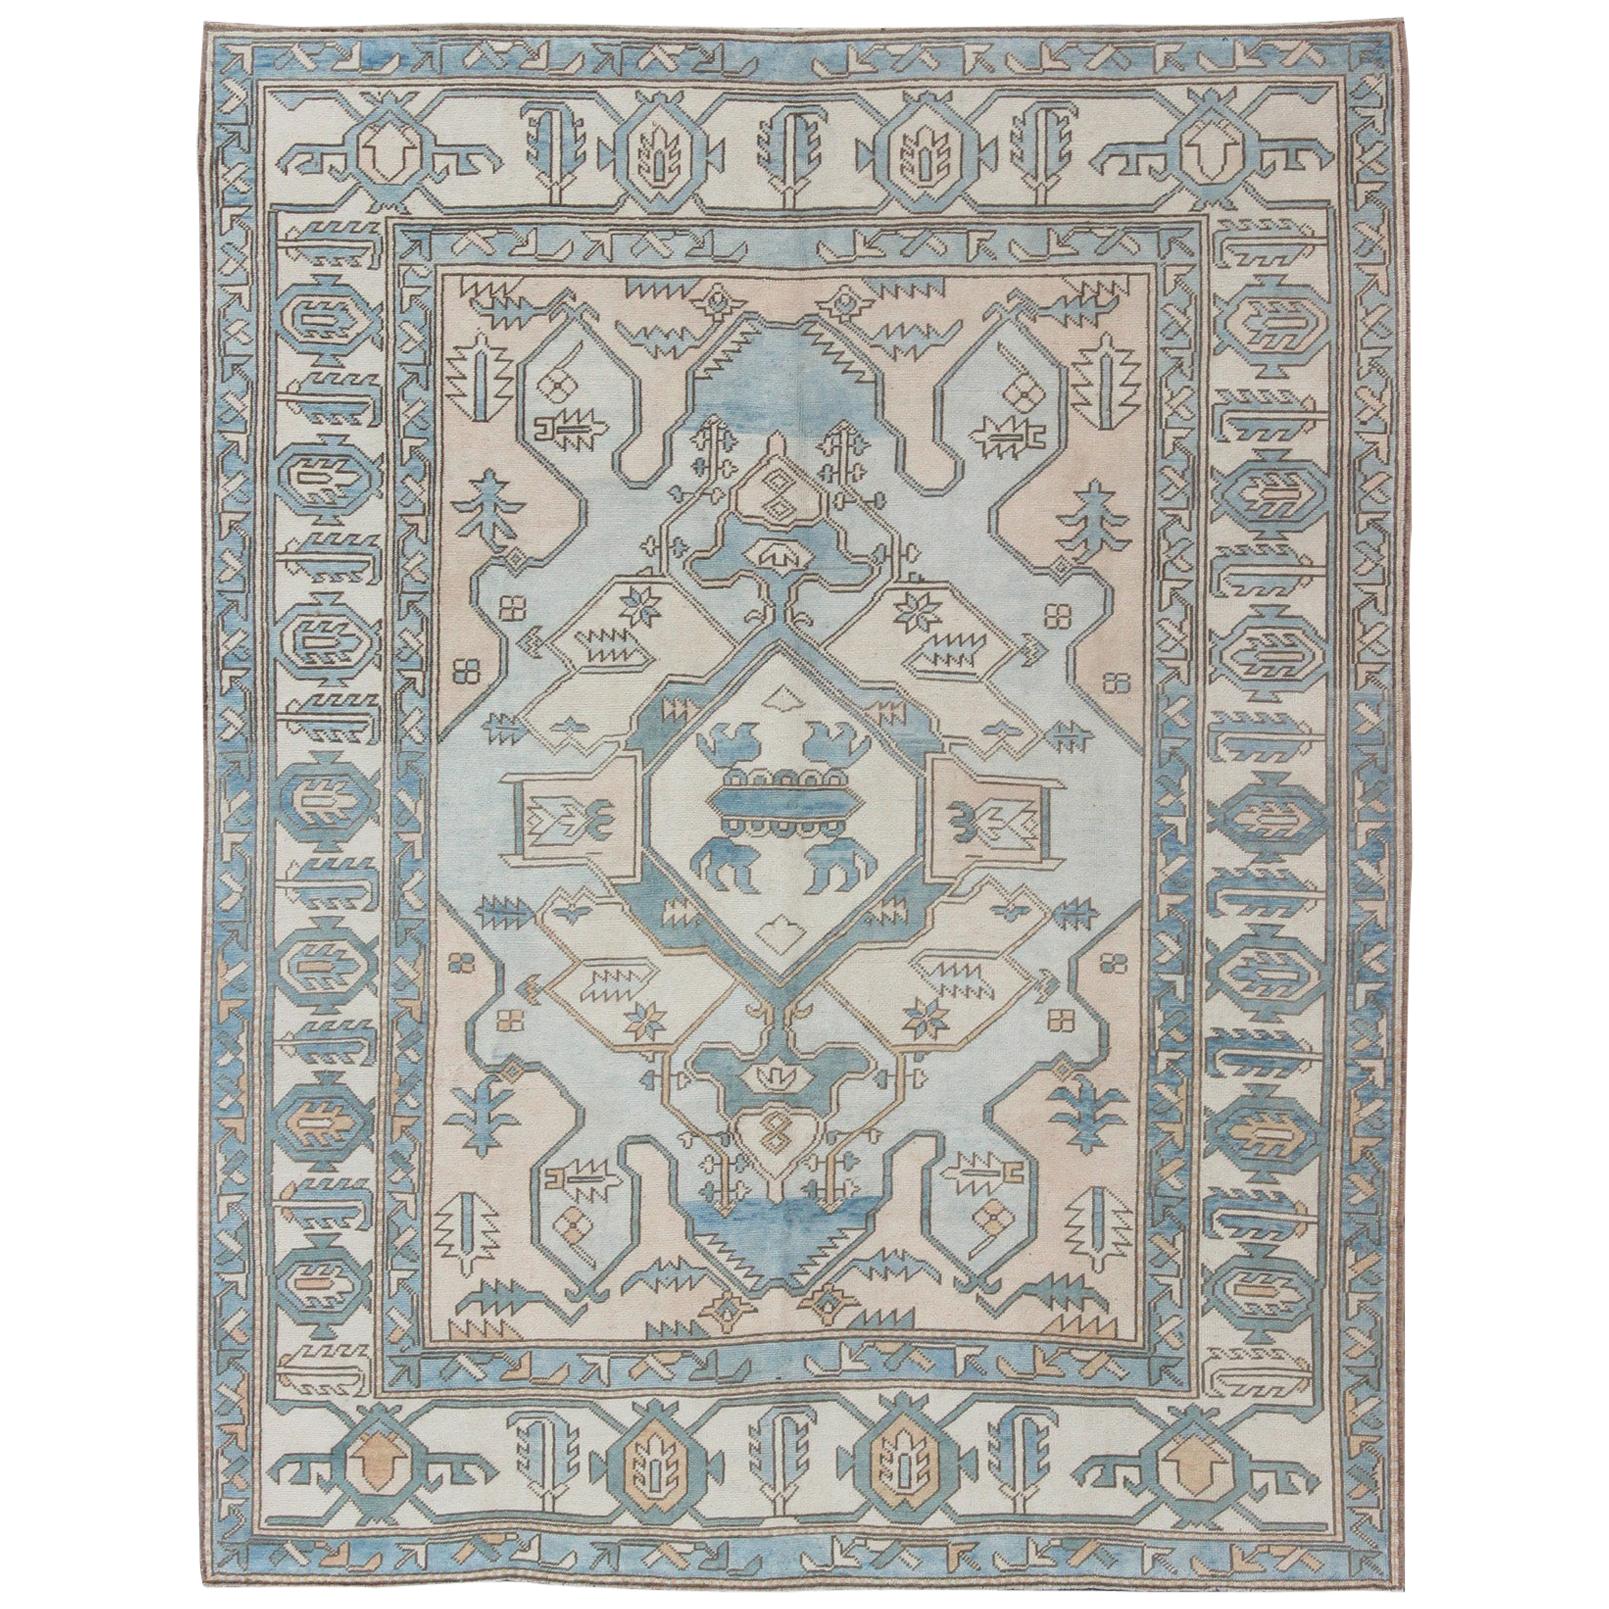 Vintage Oushak Rug from Turkey with Medallion in Shades of Blue, Cream and Nude